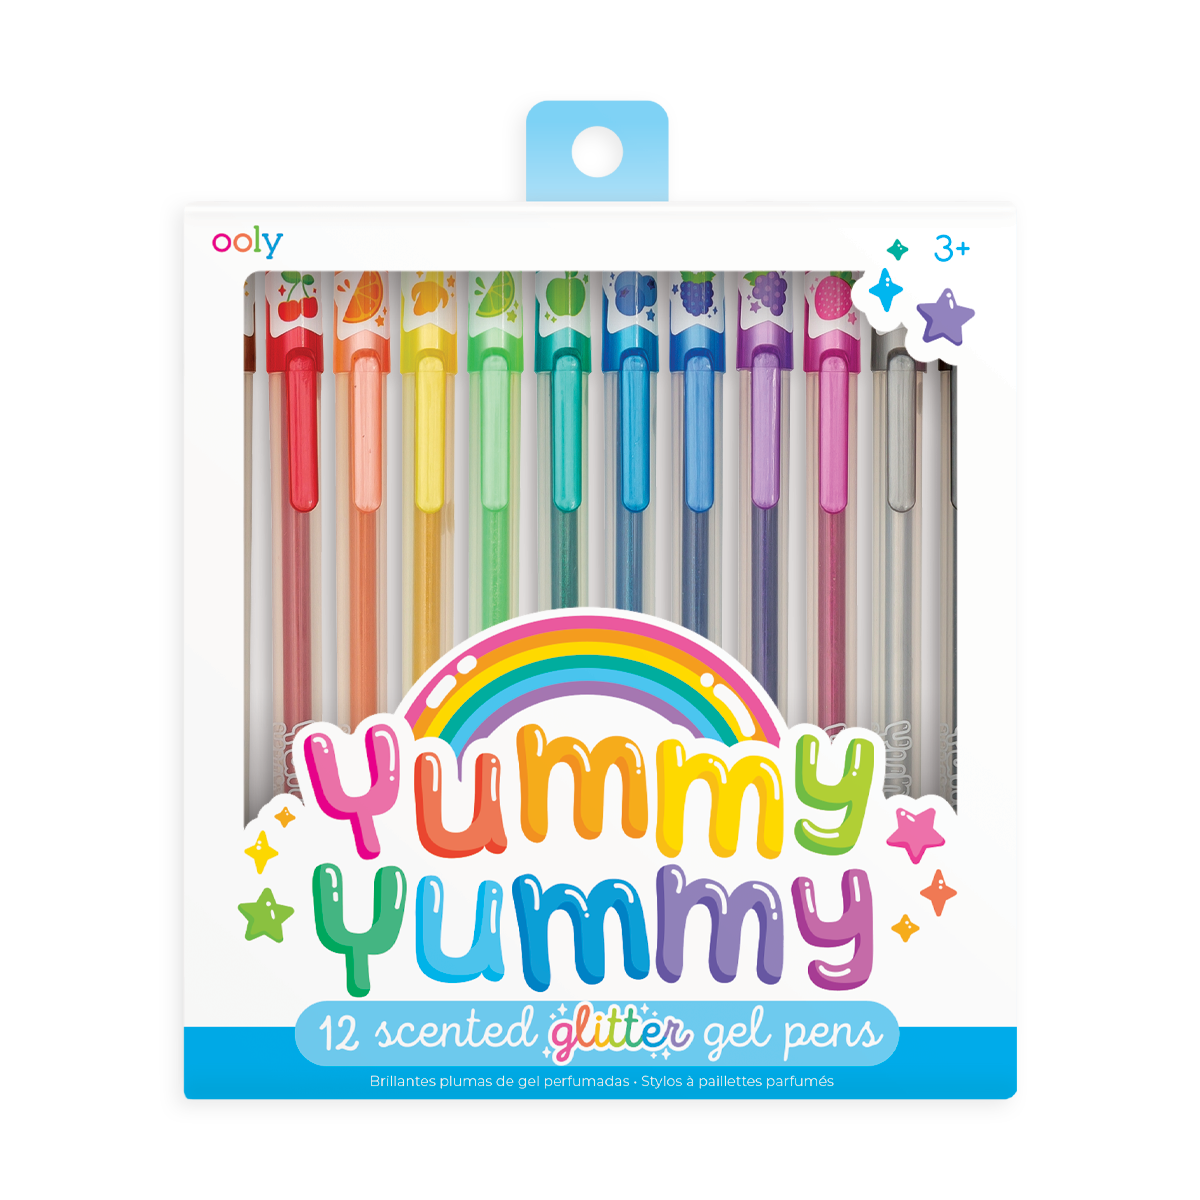 60 Wholesale SmelL-O-Rama Mini Scented Gel Pens - at 